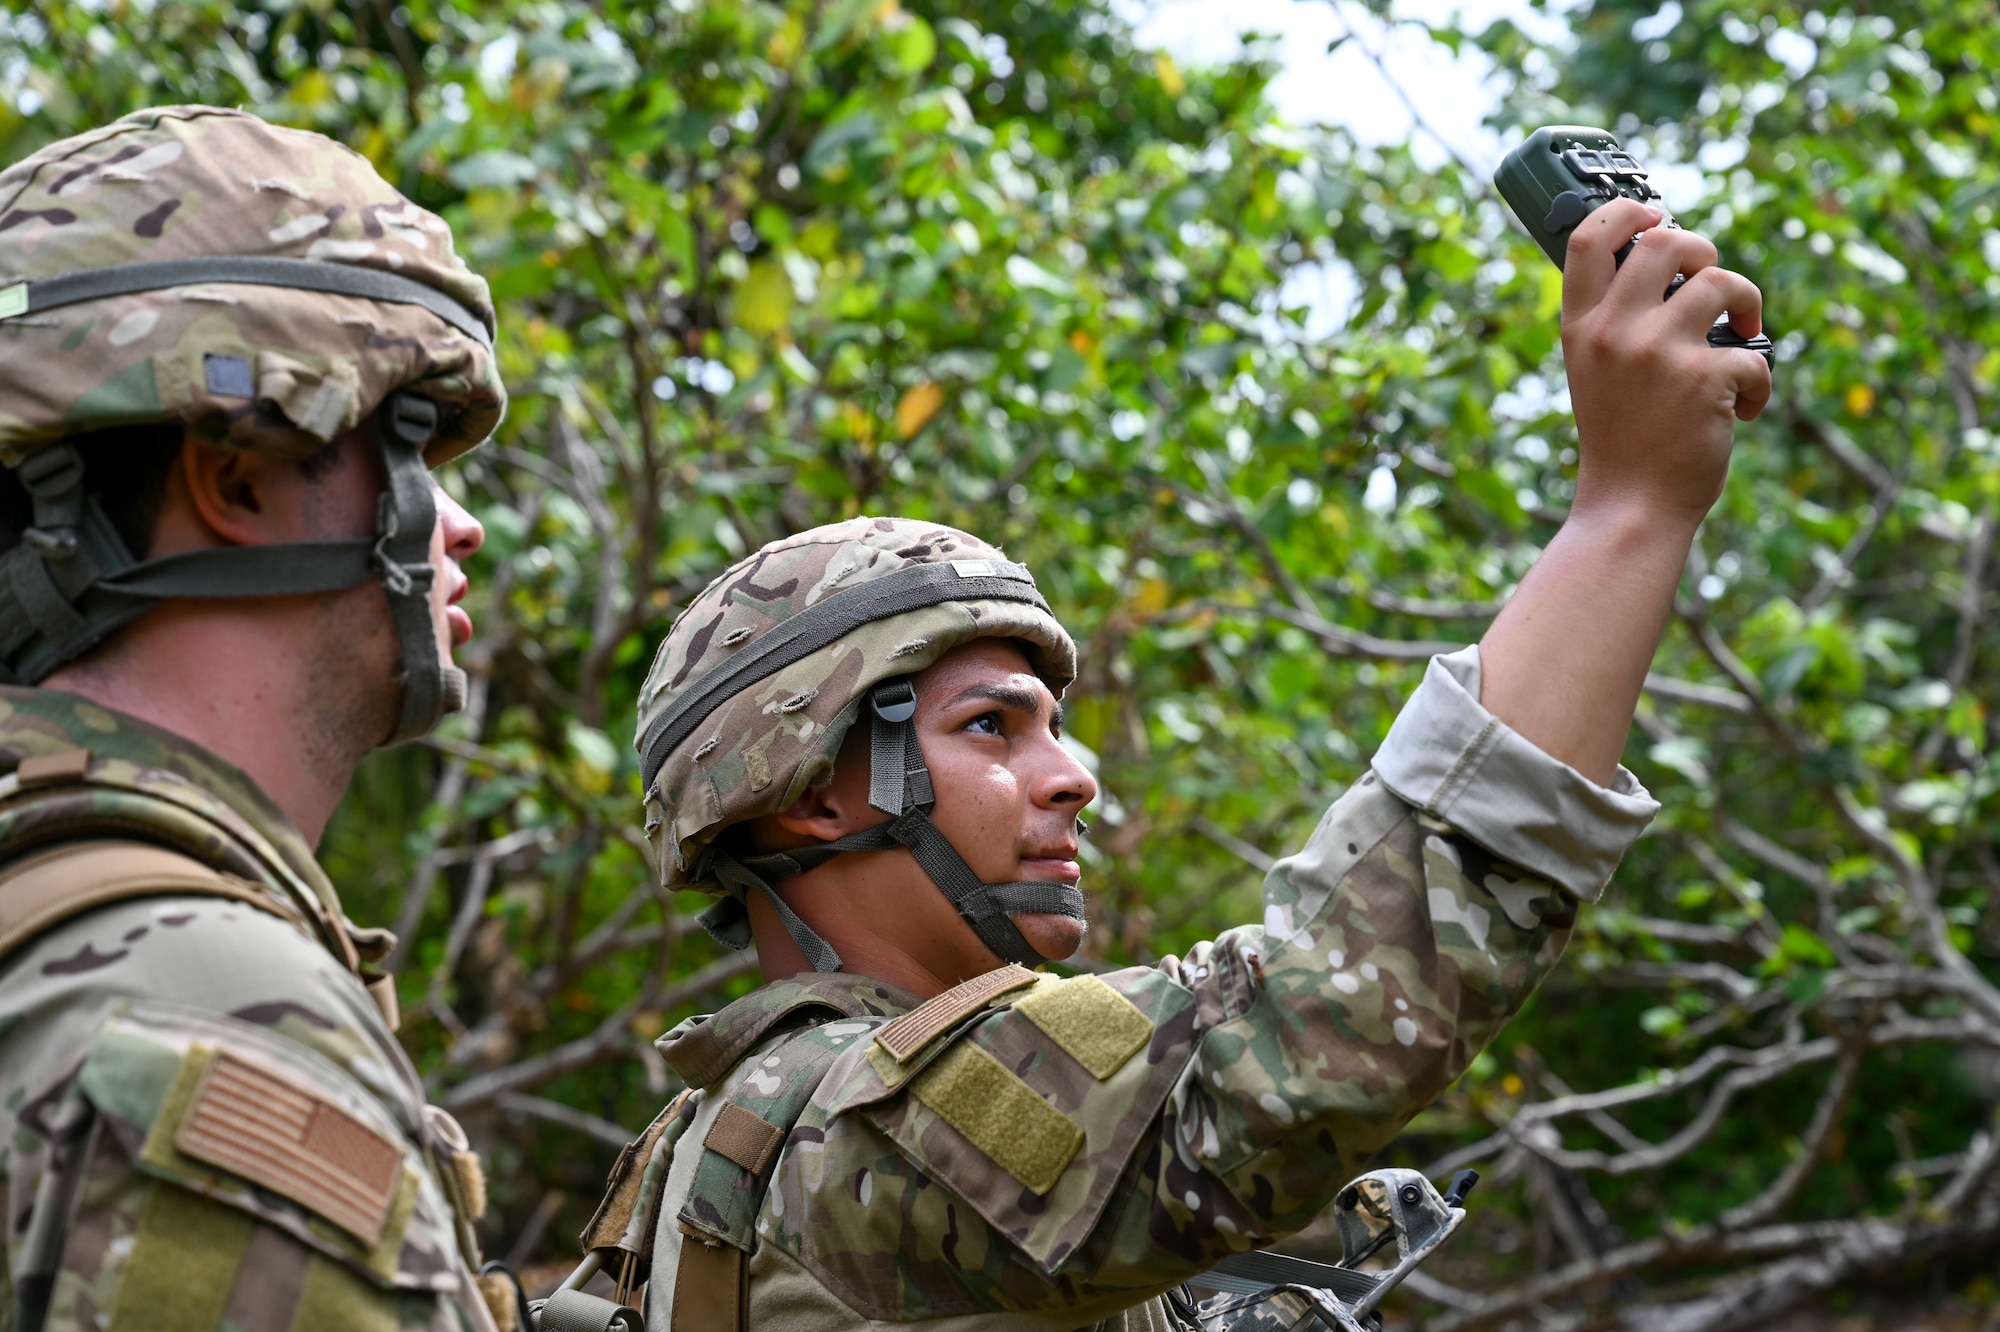 U.S. Air Force Airman 1st Class Adam Lixey and Airman 1st Class Brayan Rivera systems technicians assigned to the 644th Combat Communications Squadron, practice their land navigation skills during exercise Dragon Forge on North West Field, Guam, April 13, 2021. Exercise Dragon Forge is a combat skills training course that prepares participants to deploy to austere locations. (U.S. Air Force photo by Tech. Sgt. Esteban Esquivel)